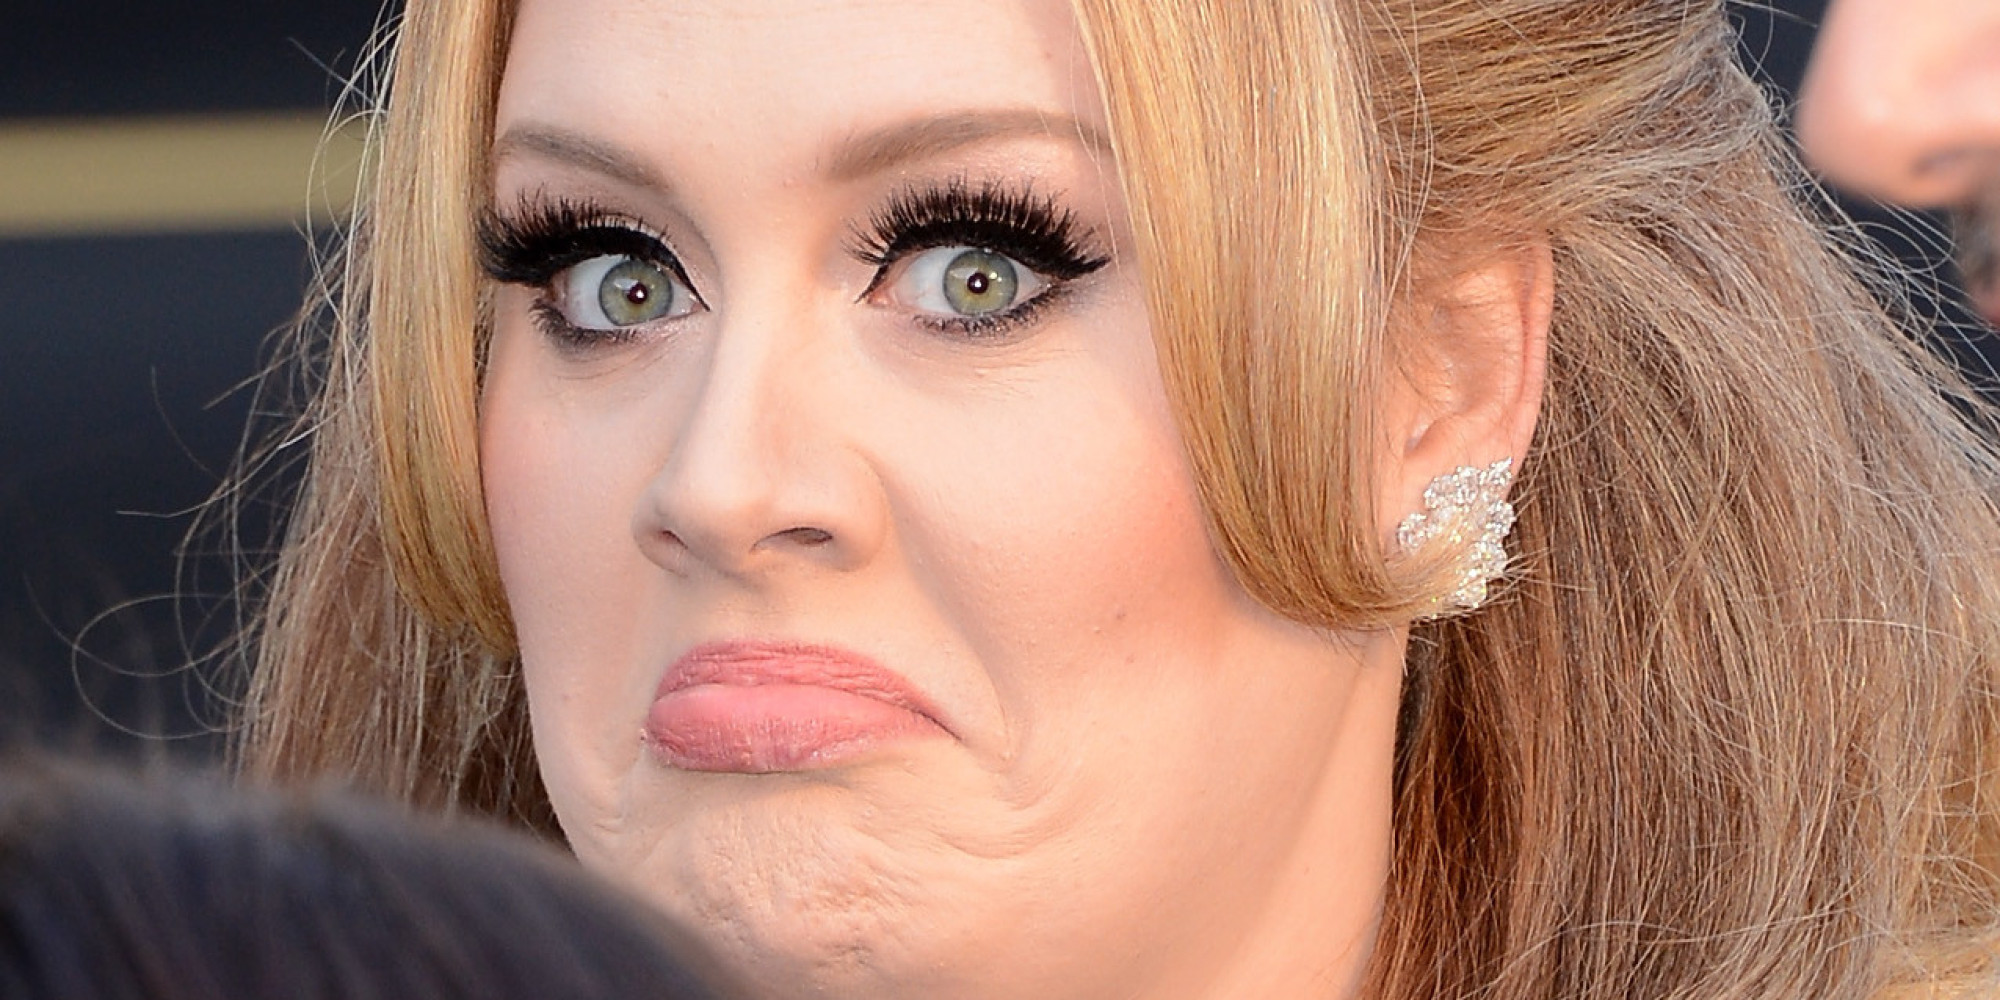 15 Times Adele Was Just Being Her Goofy Yet Gorgeous Self